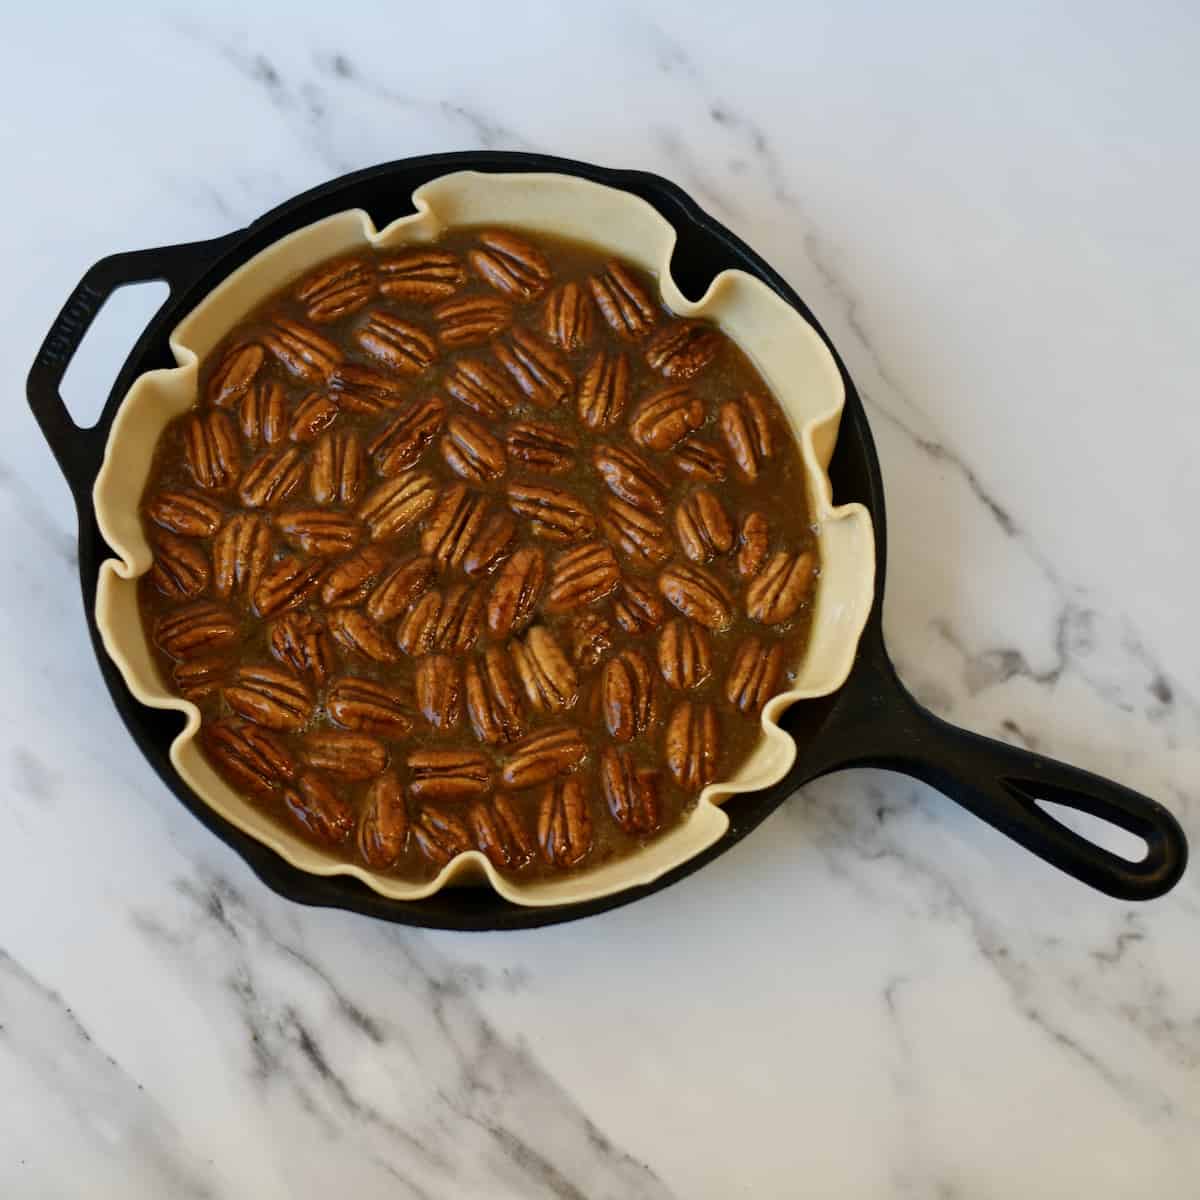 Pecans and filling in unbaked pie shell fitted in a cast iron skillet.